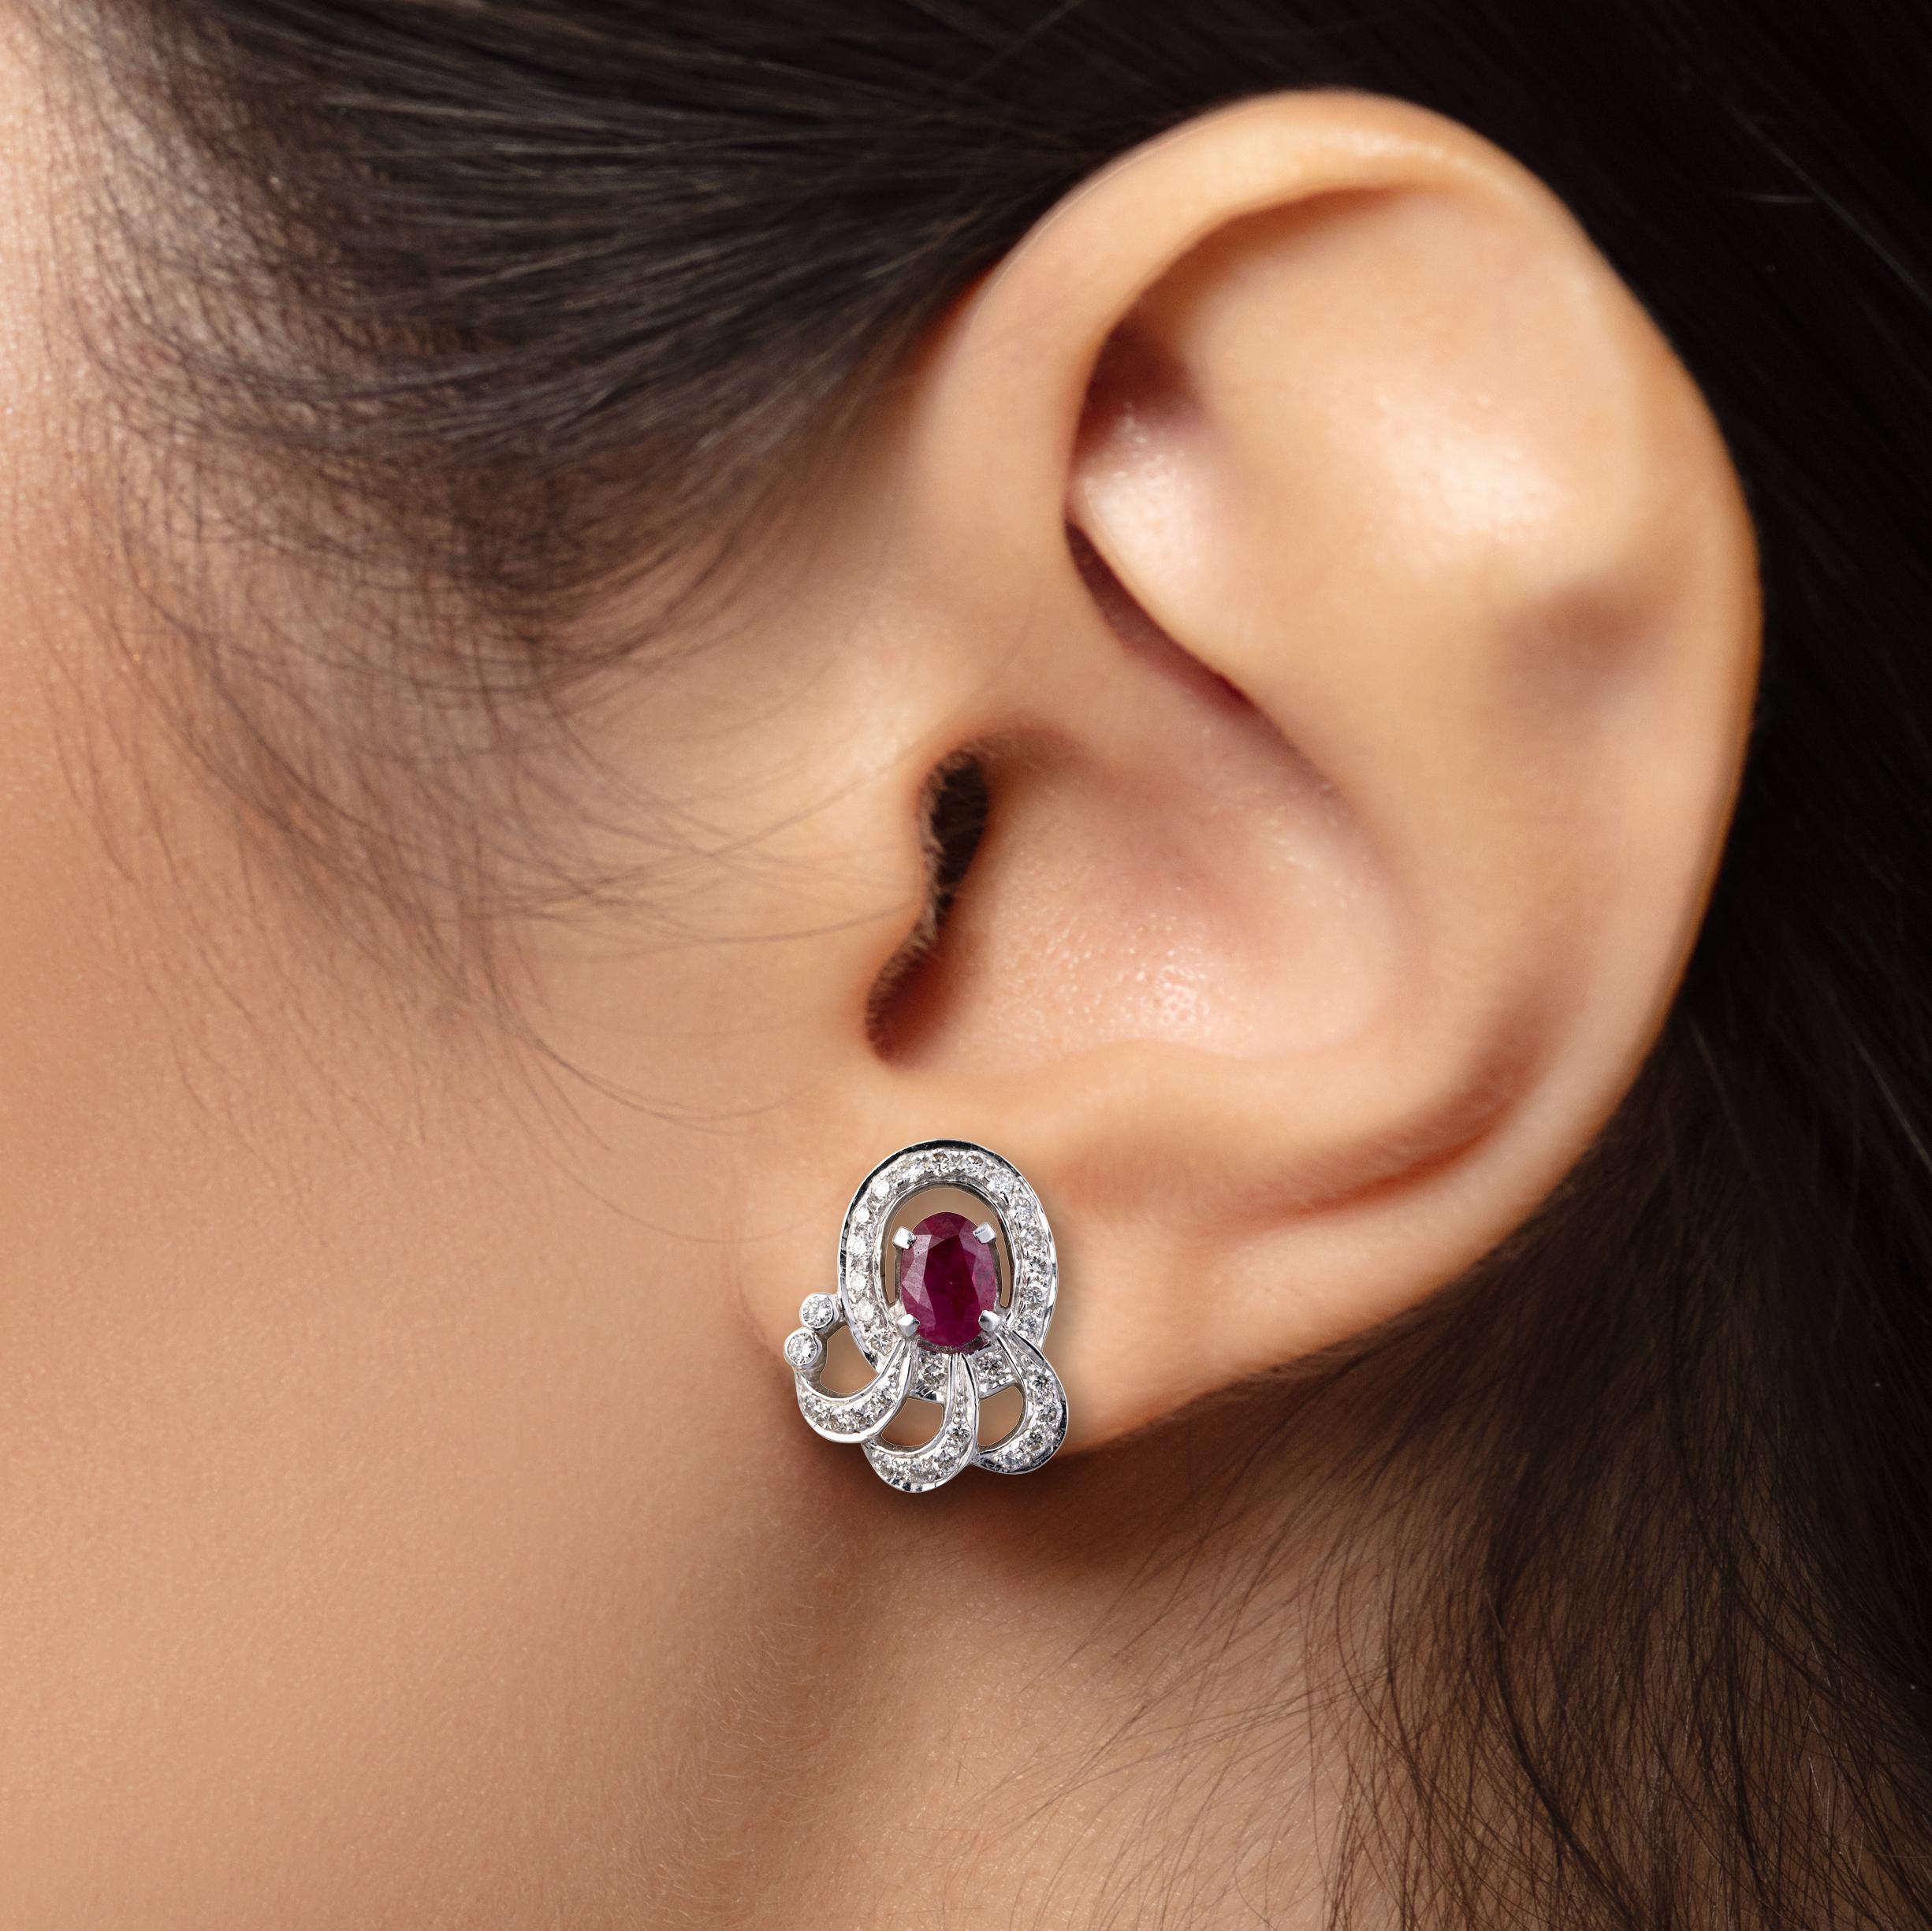 Antique Cushion Cut 18k gold Diamond and Ruby Earring with 0.50 carats diamond and 1.35 carats ruby For Sale